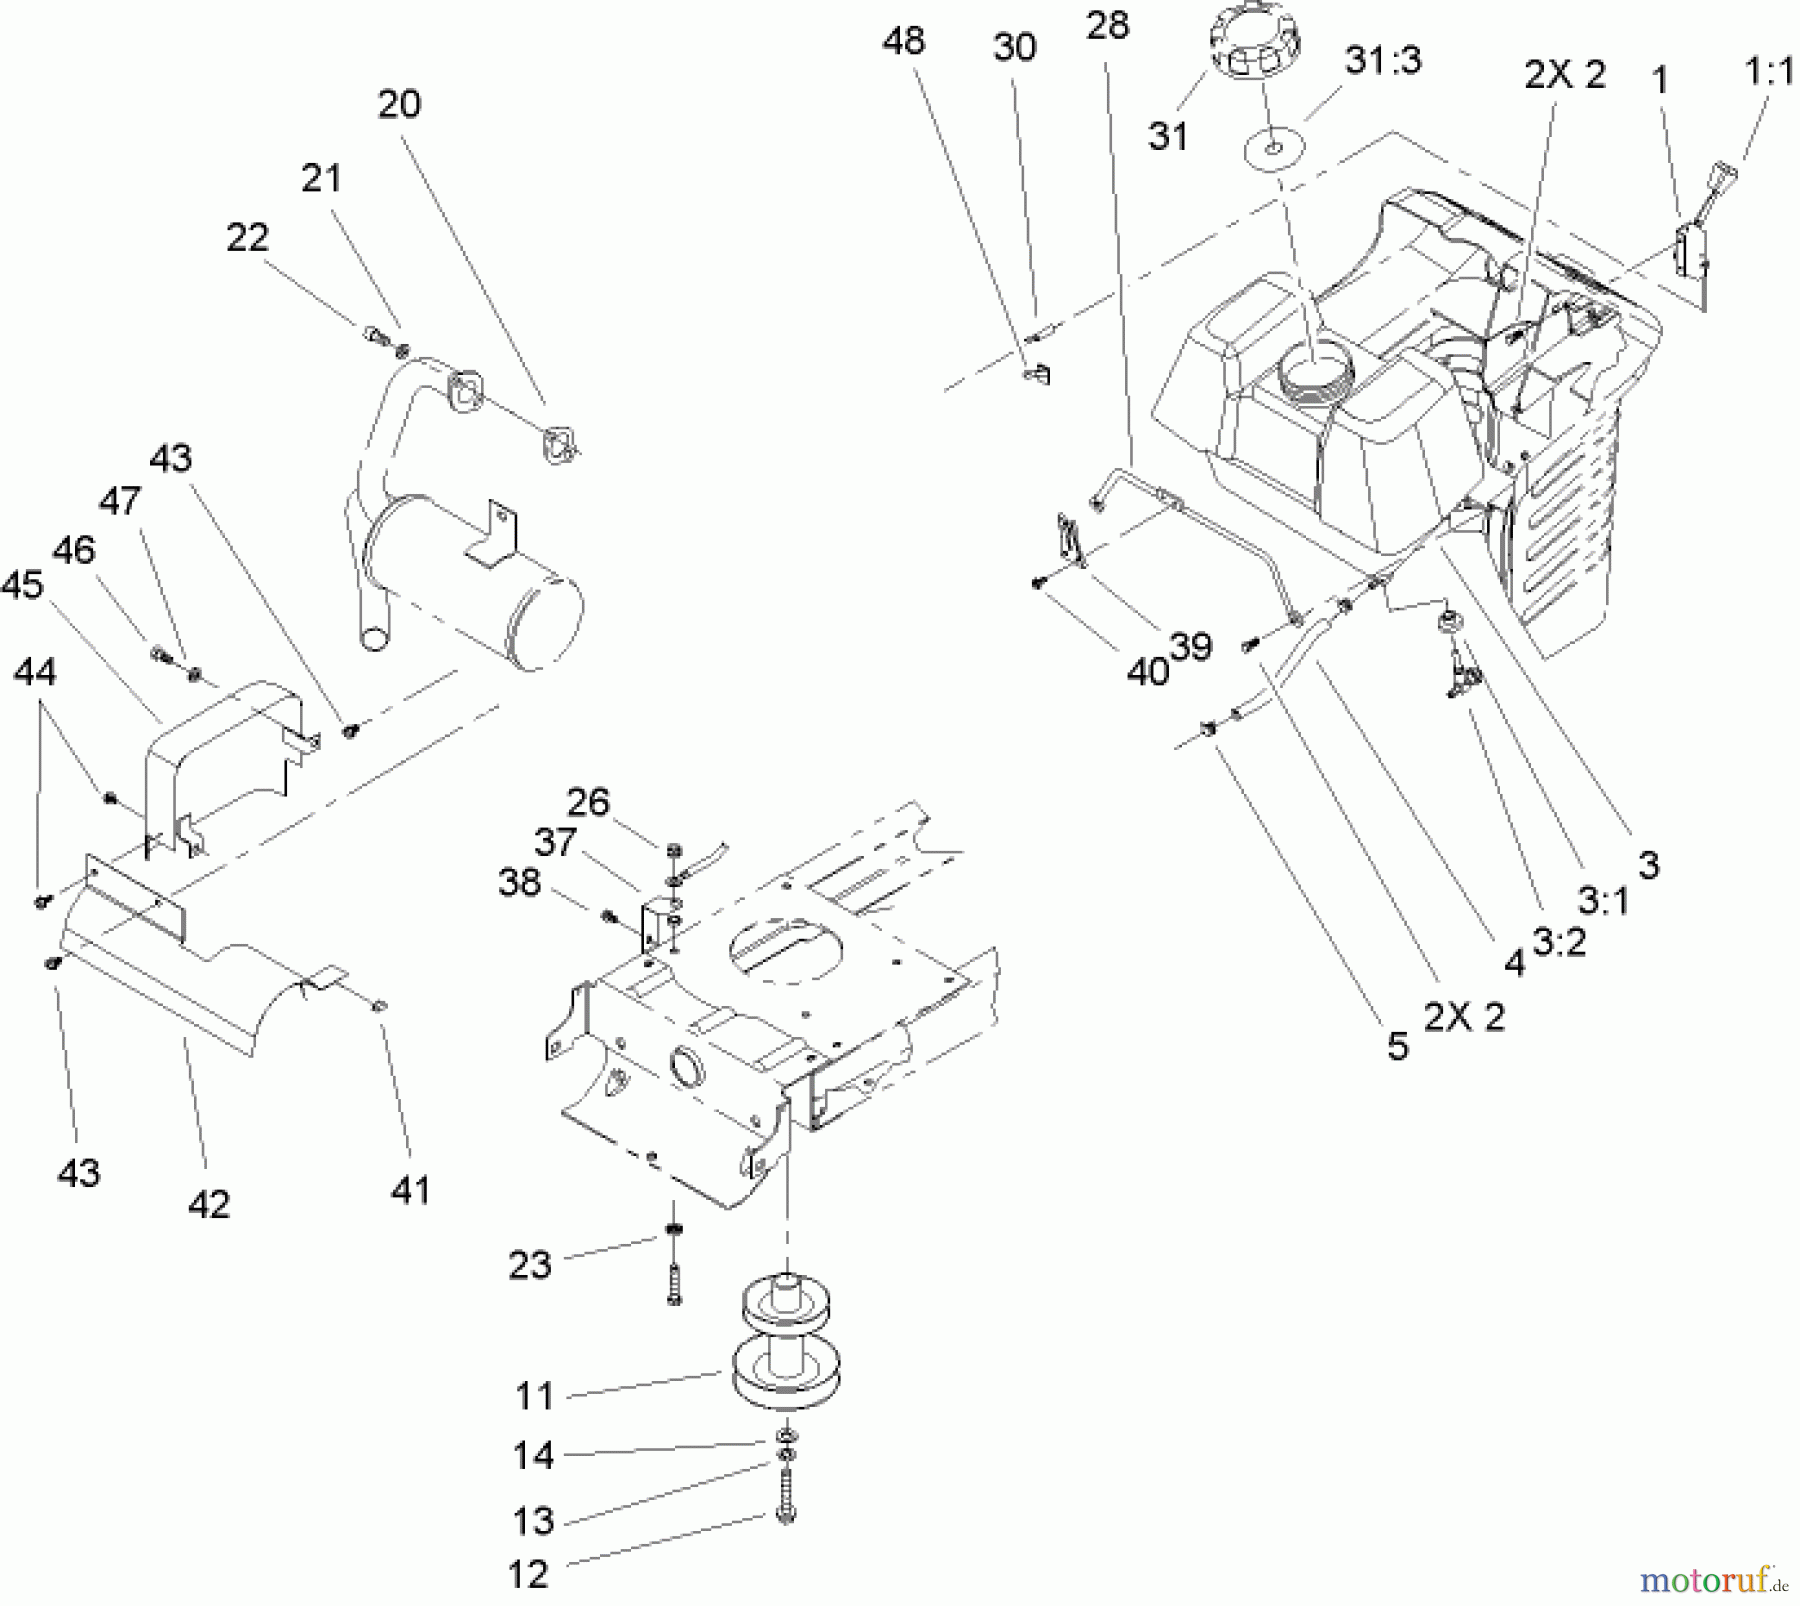  Toro Neu Mowers, Lawn & Garden Tractor Seite 1 71209 (13-32XLE) - Toro 13-32XLE Lawn Tractor, 2004 (240000001-240999999) OHV ENGINE SYSTEM COMPONENT ASSEMBLY